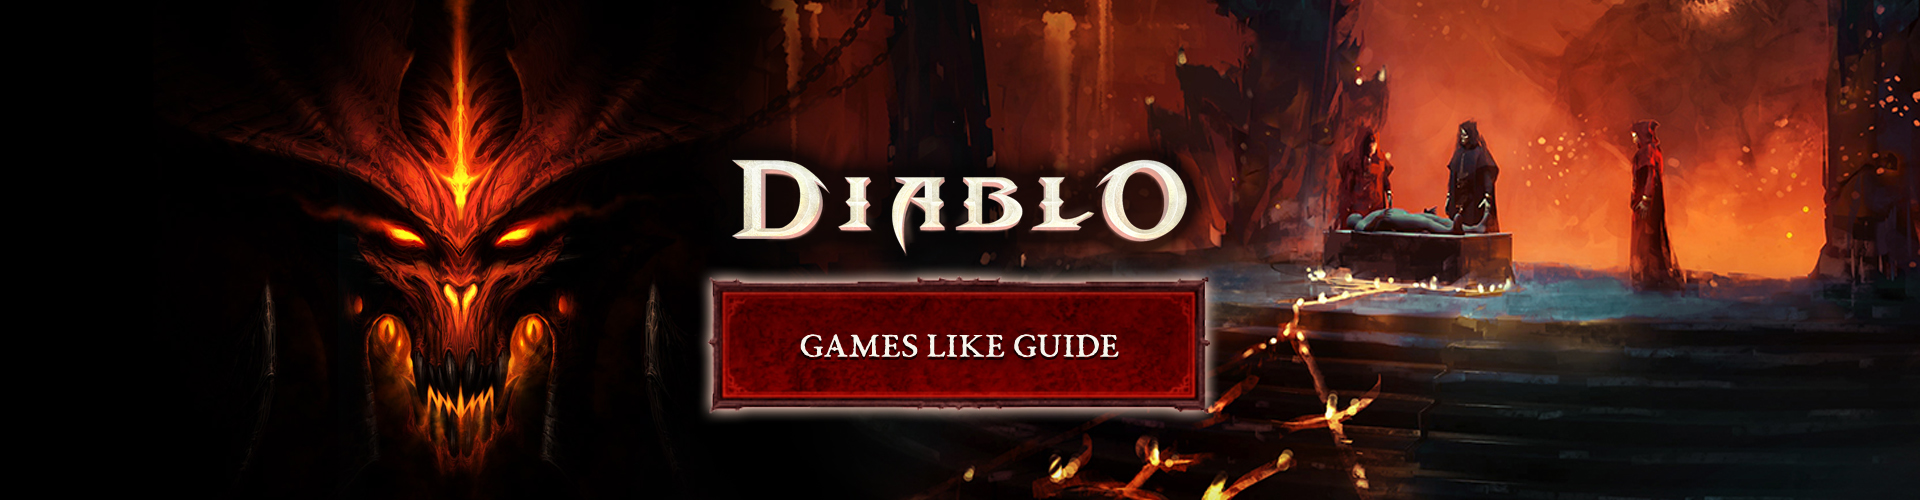 Top 15 Games Like Diablo: The Best Related Video Games